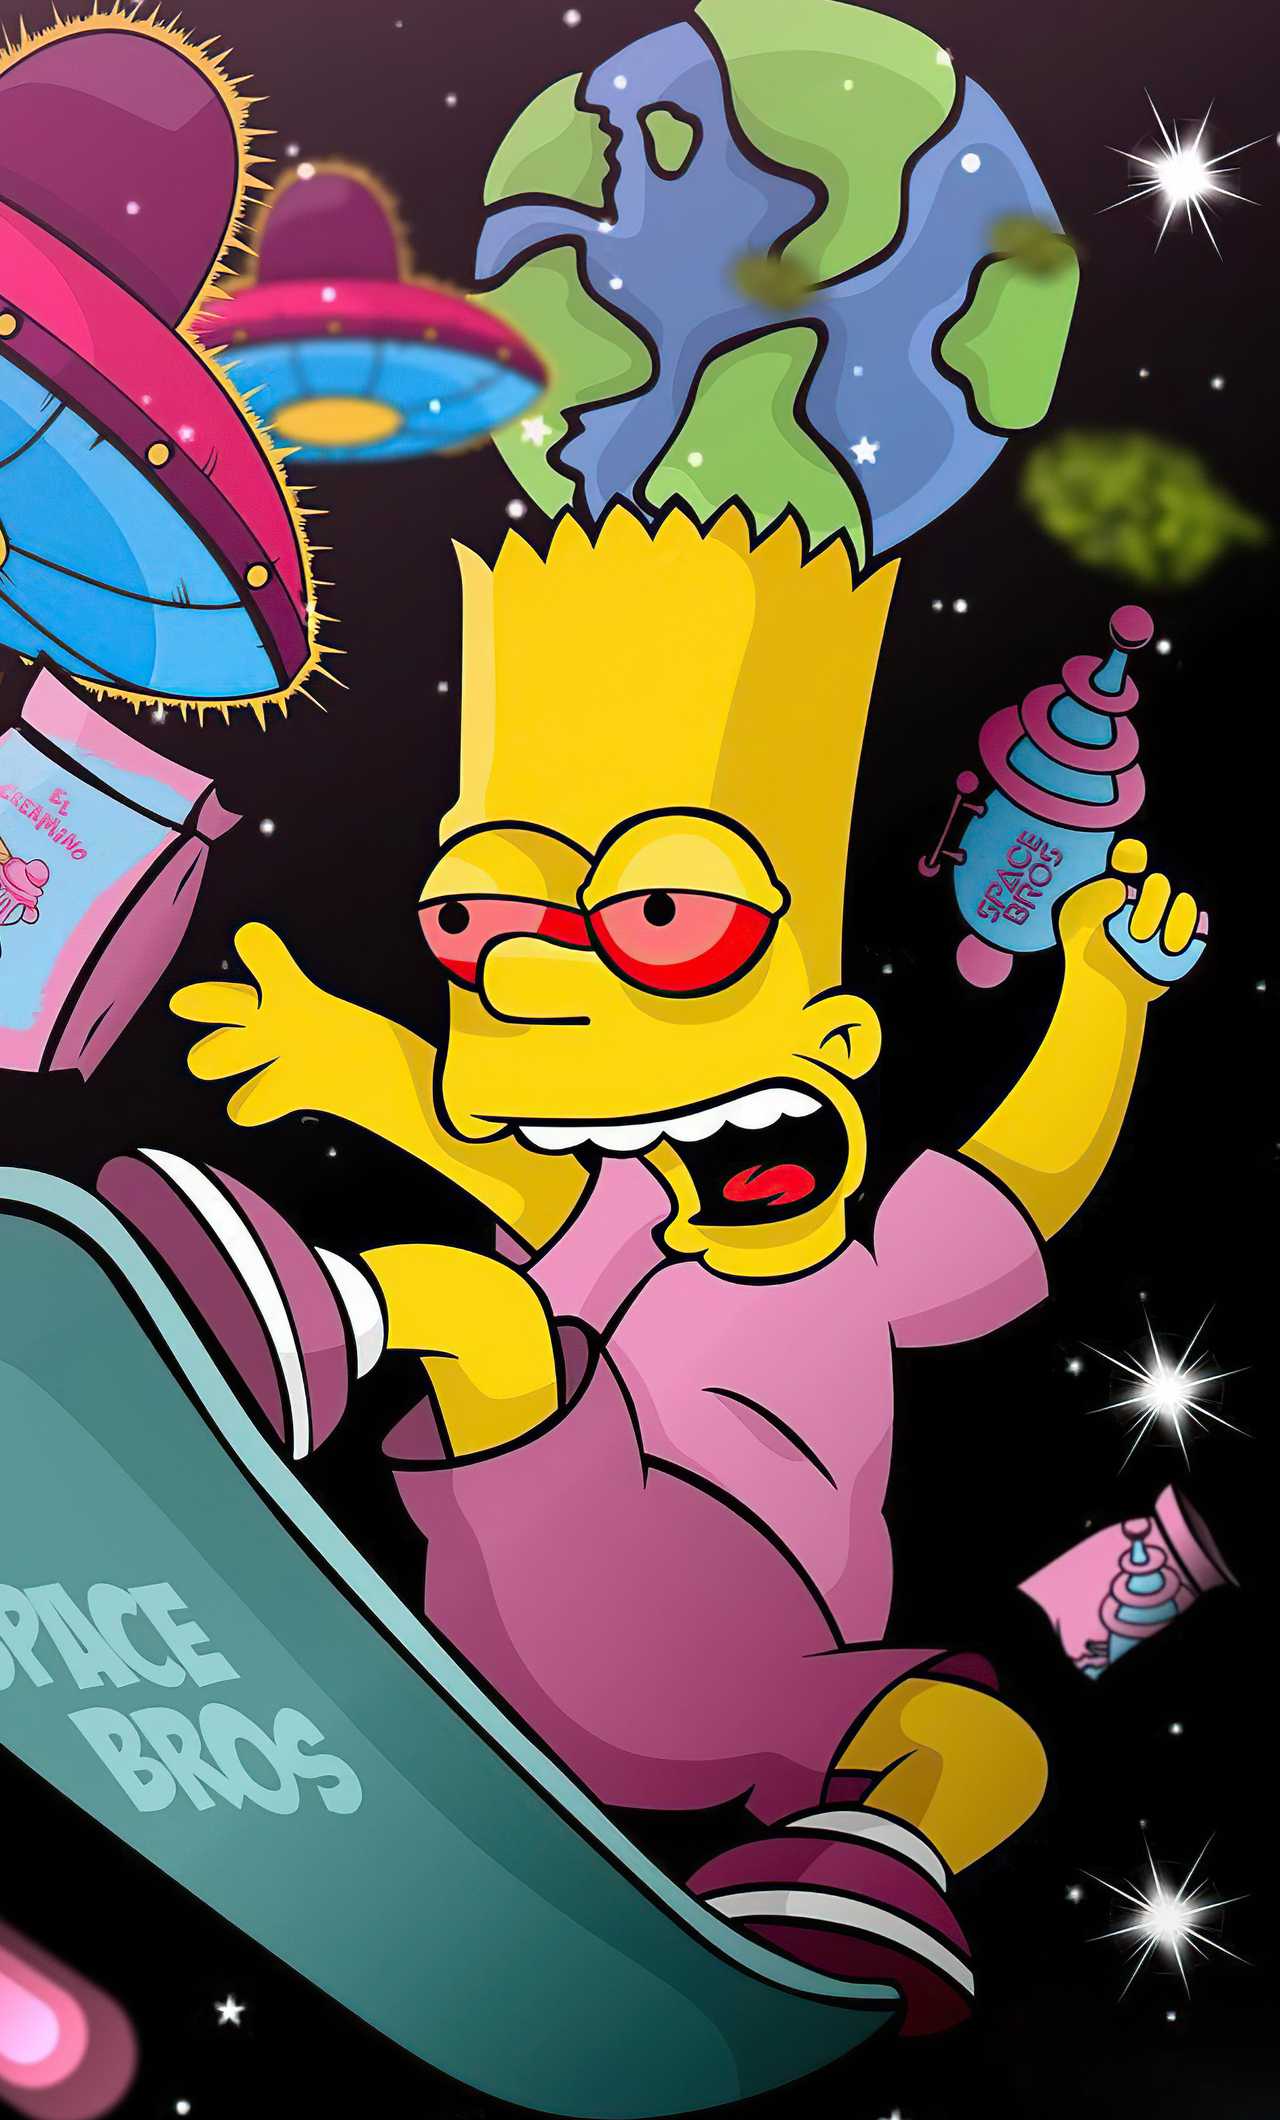 Bart Simpson iPhone Wallpaper with image resolution 1080x1920 pixel. You can make this wallpaper for your iPhone 5, 6, 7, 8, X backgrounds, Mobile Screensaver, or iPad Lock Screen - The Simpsons, Bart Simpson